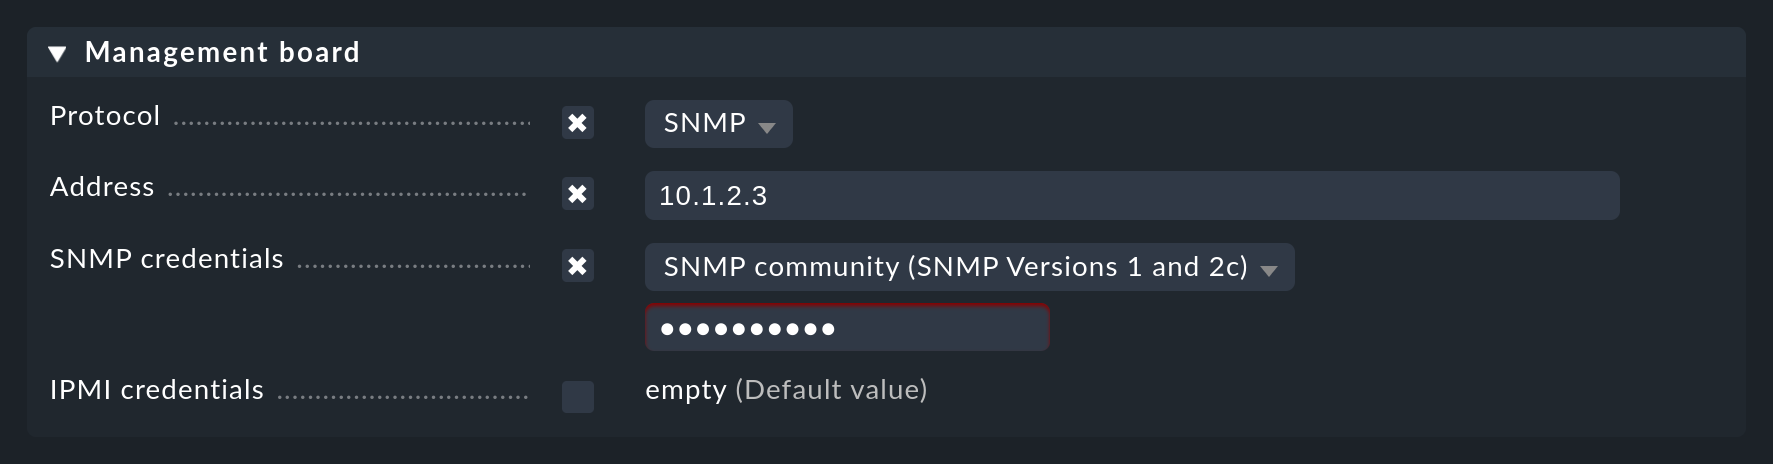 The configuration of the management board for SNMP in the properties of the host.